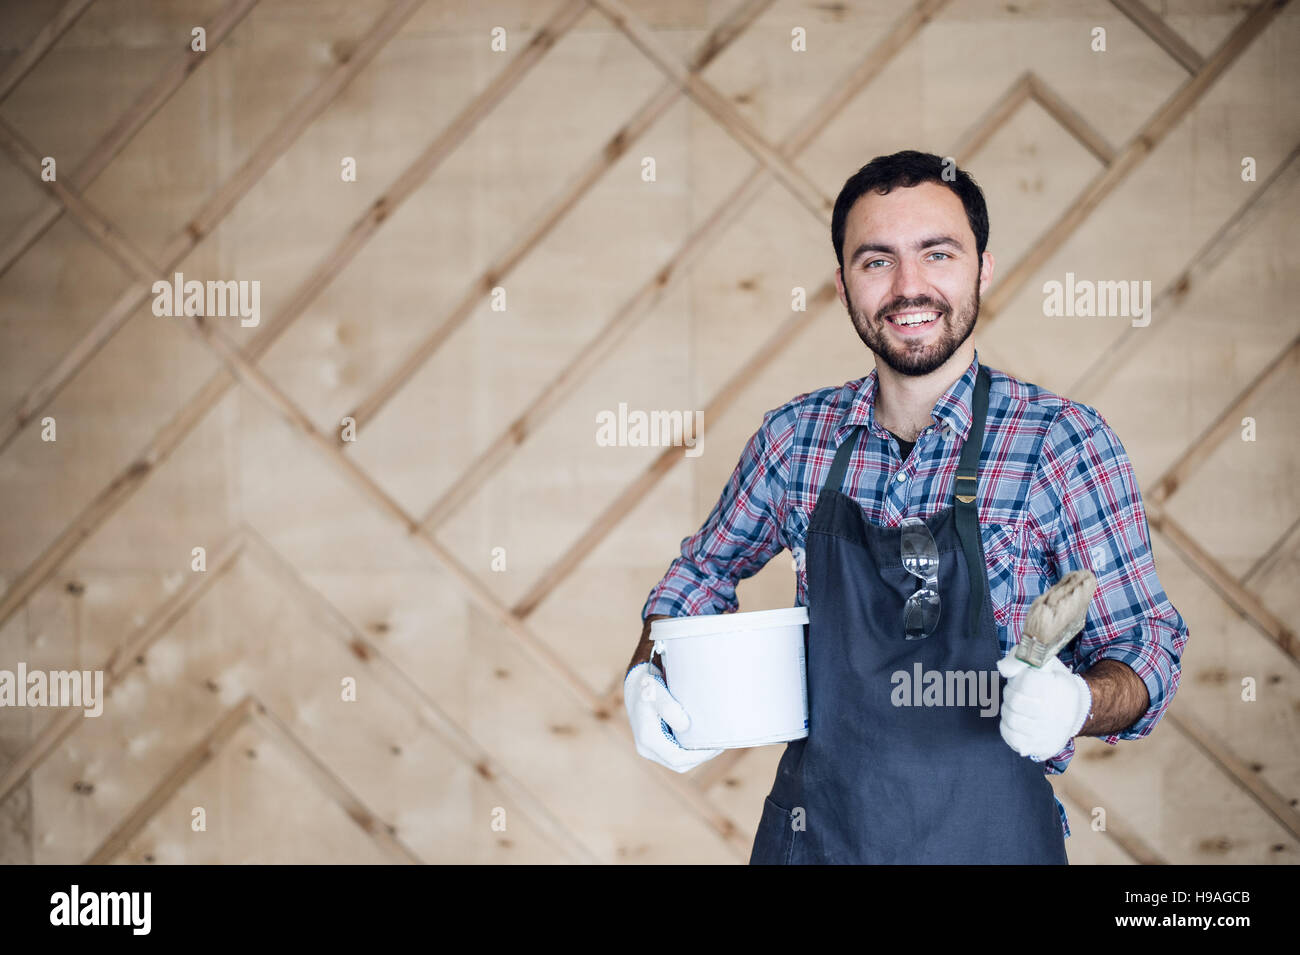 Young male carpenter wearing gloves and glasses with hands on hips Stock Photo